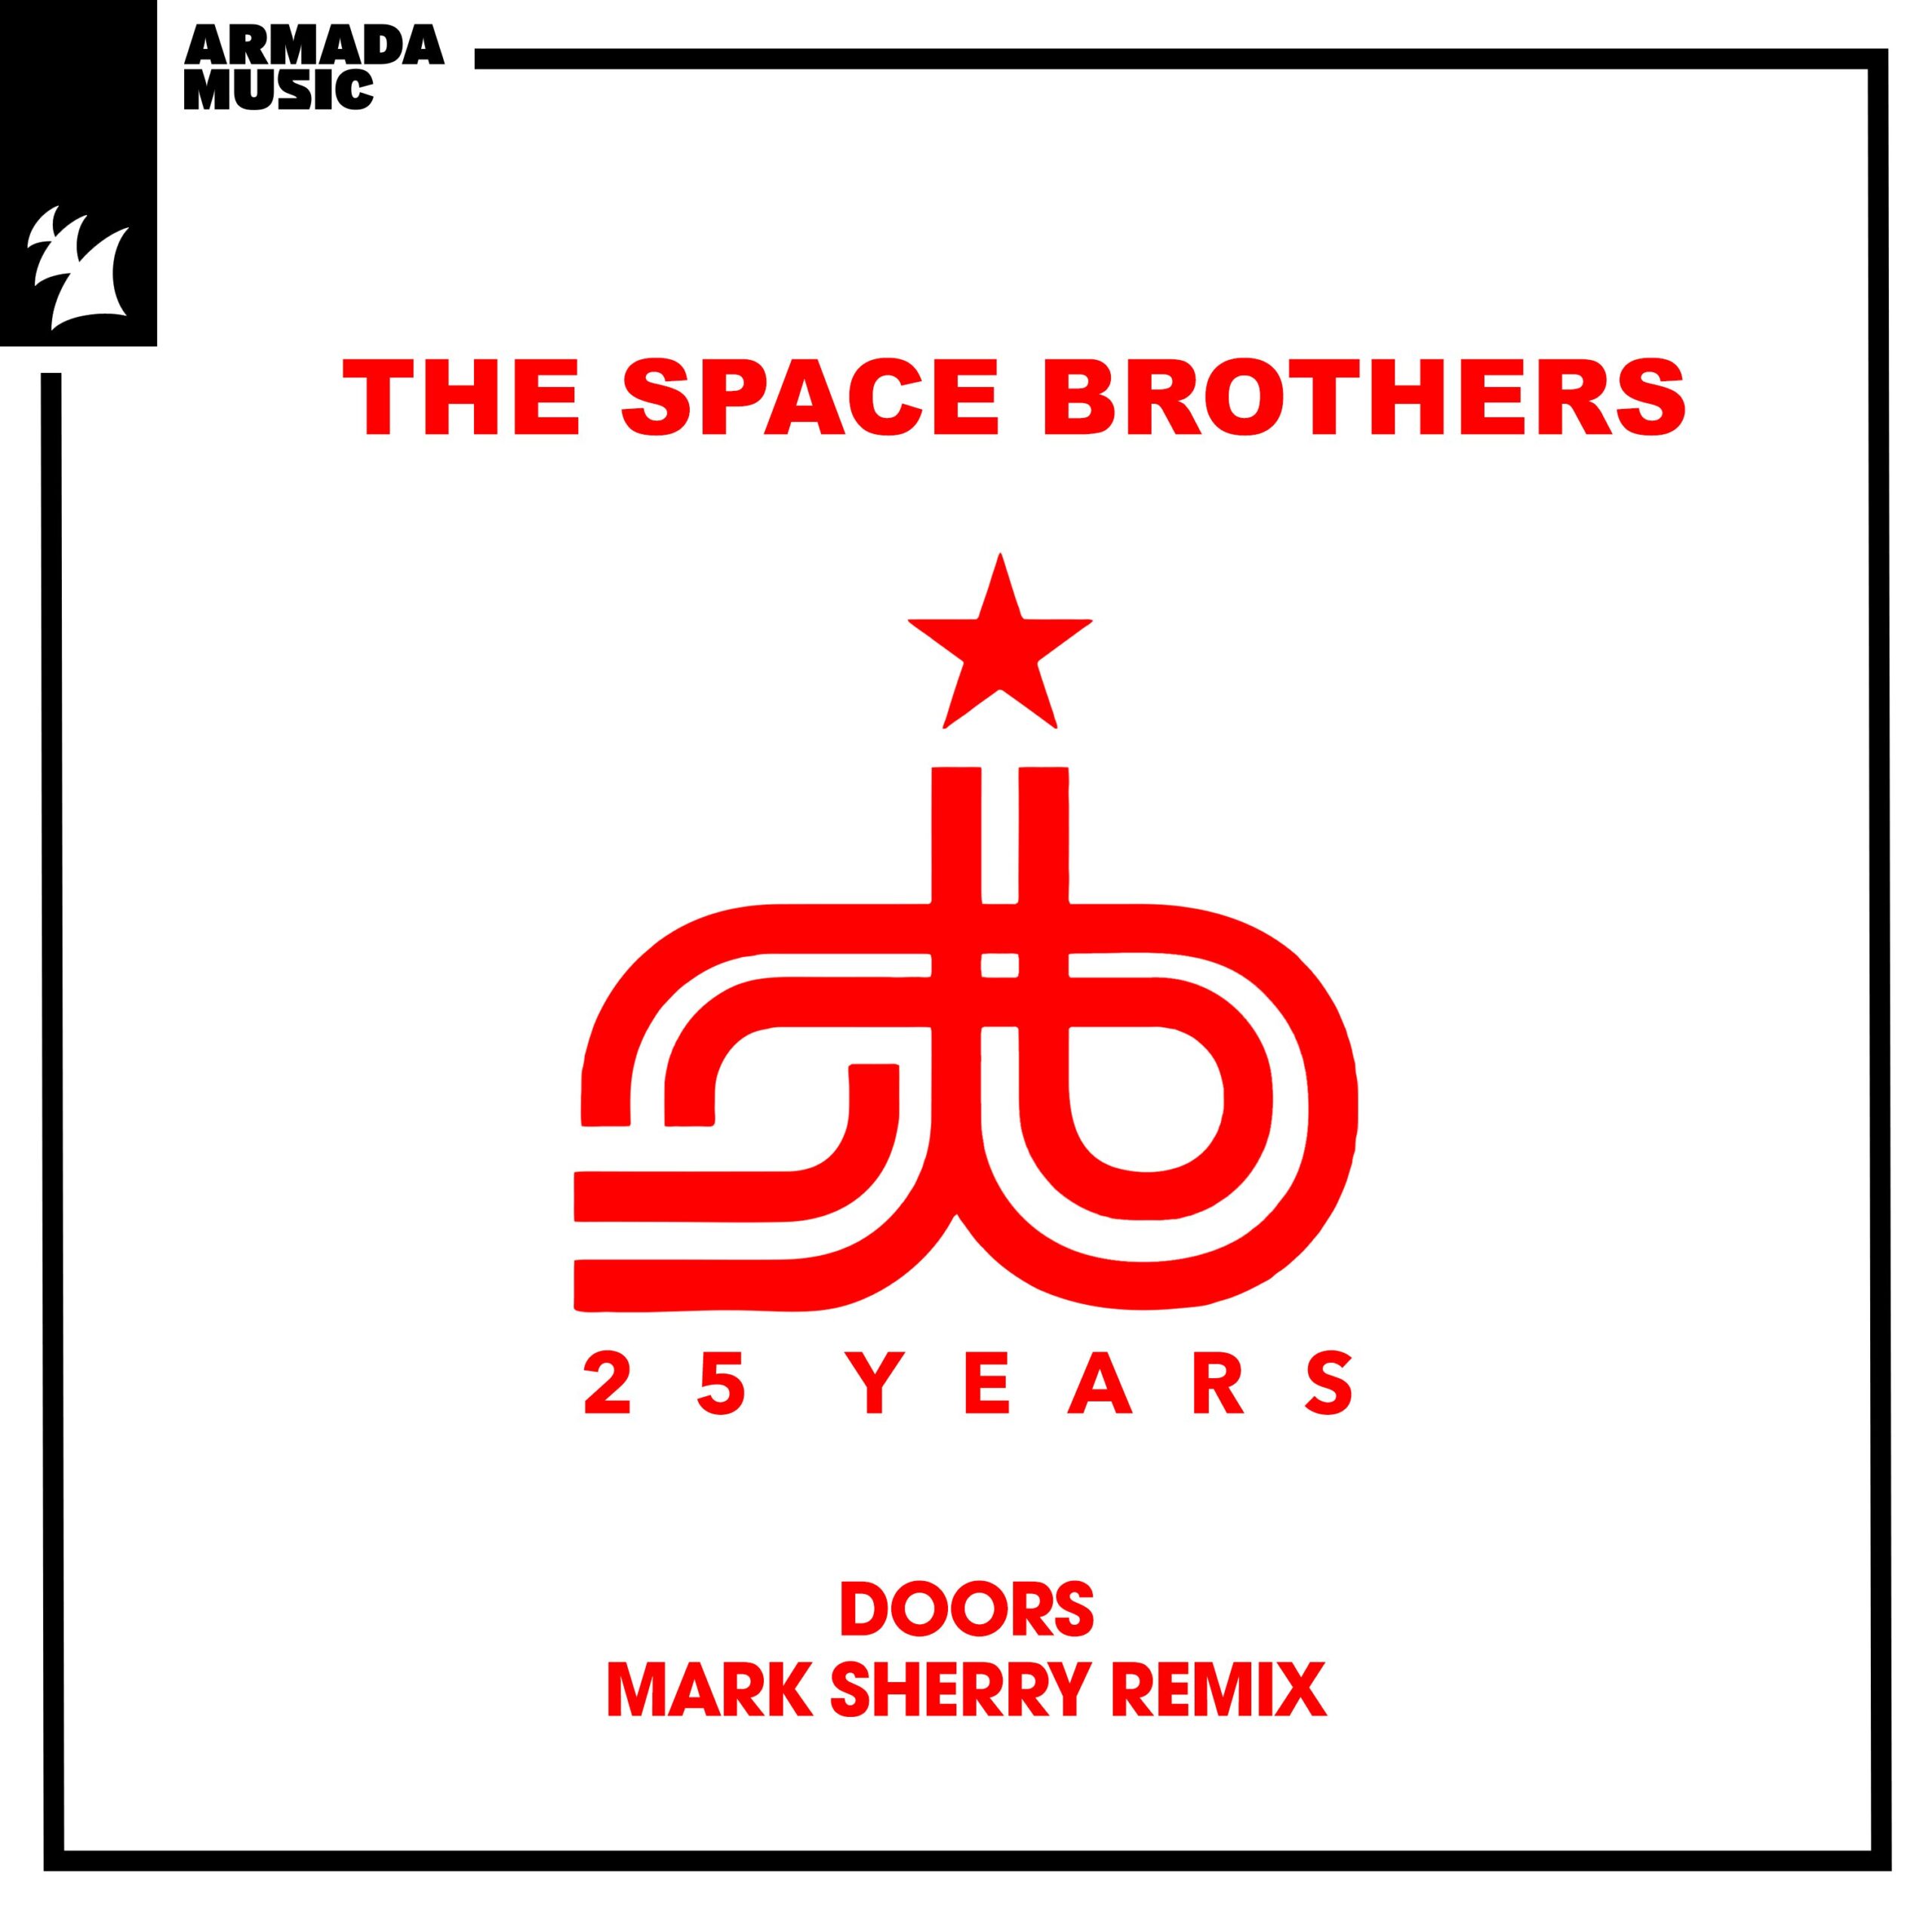 The Space Brothers presents Doors (Mark Sherry Remix) on Armada Music